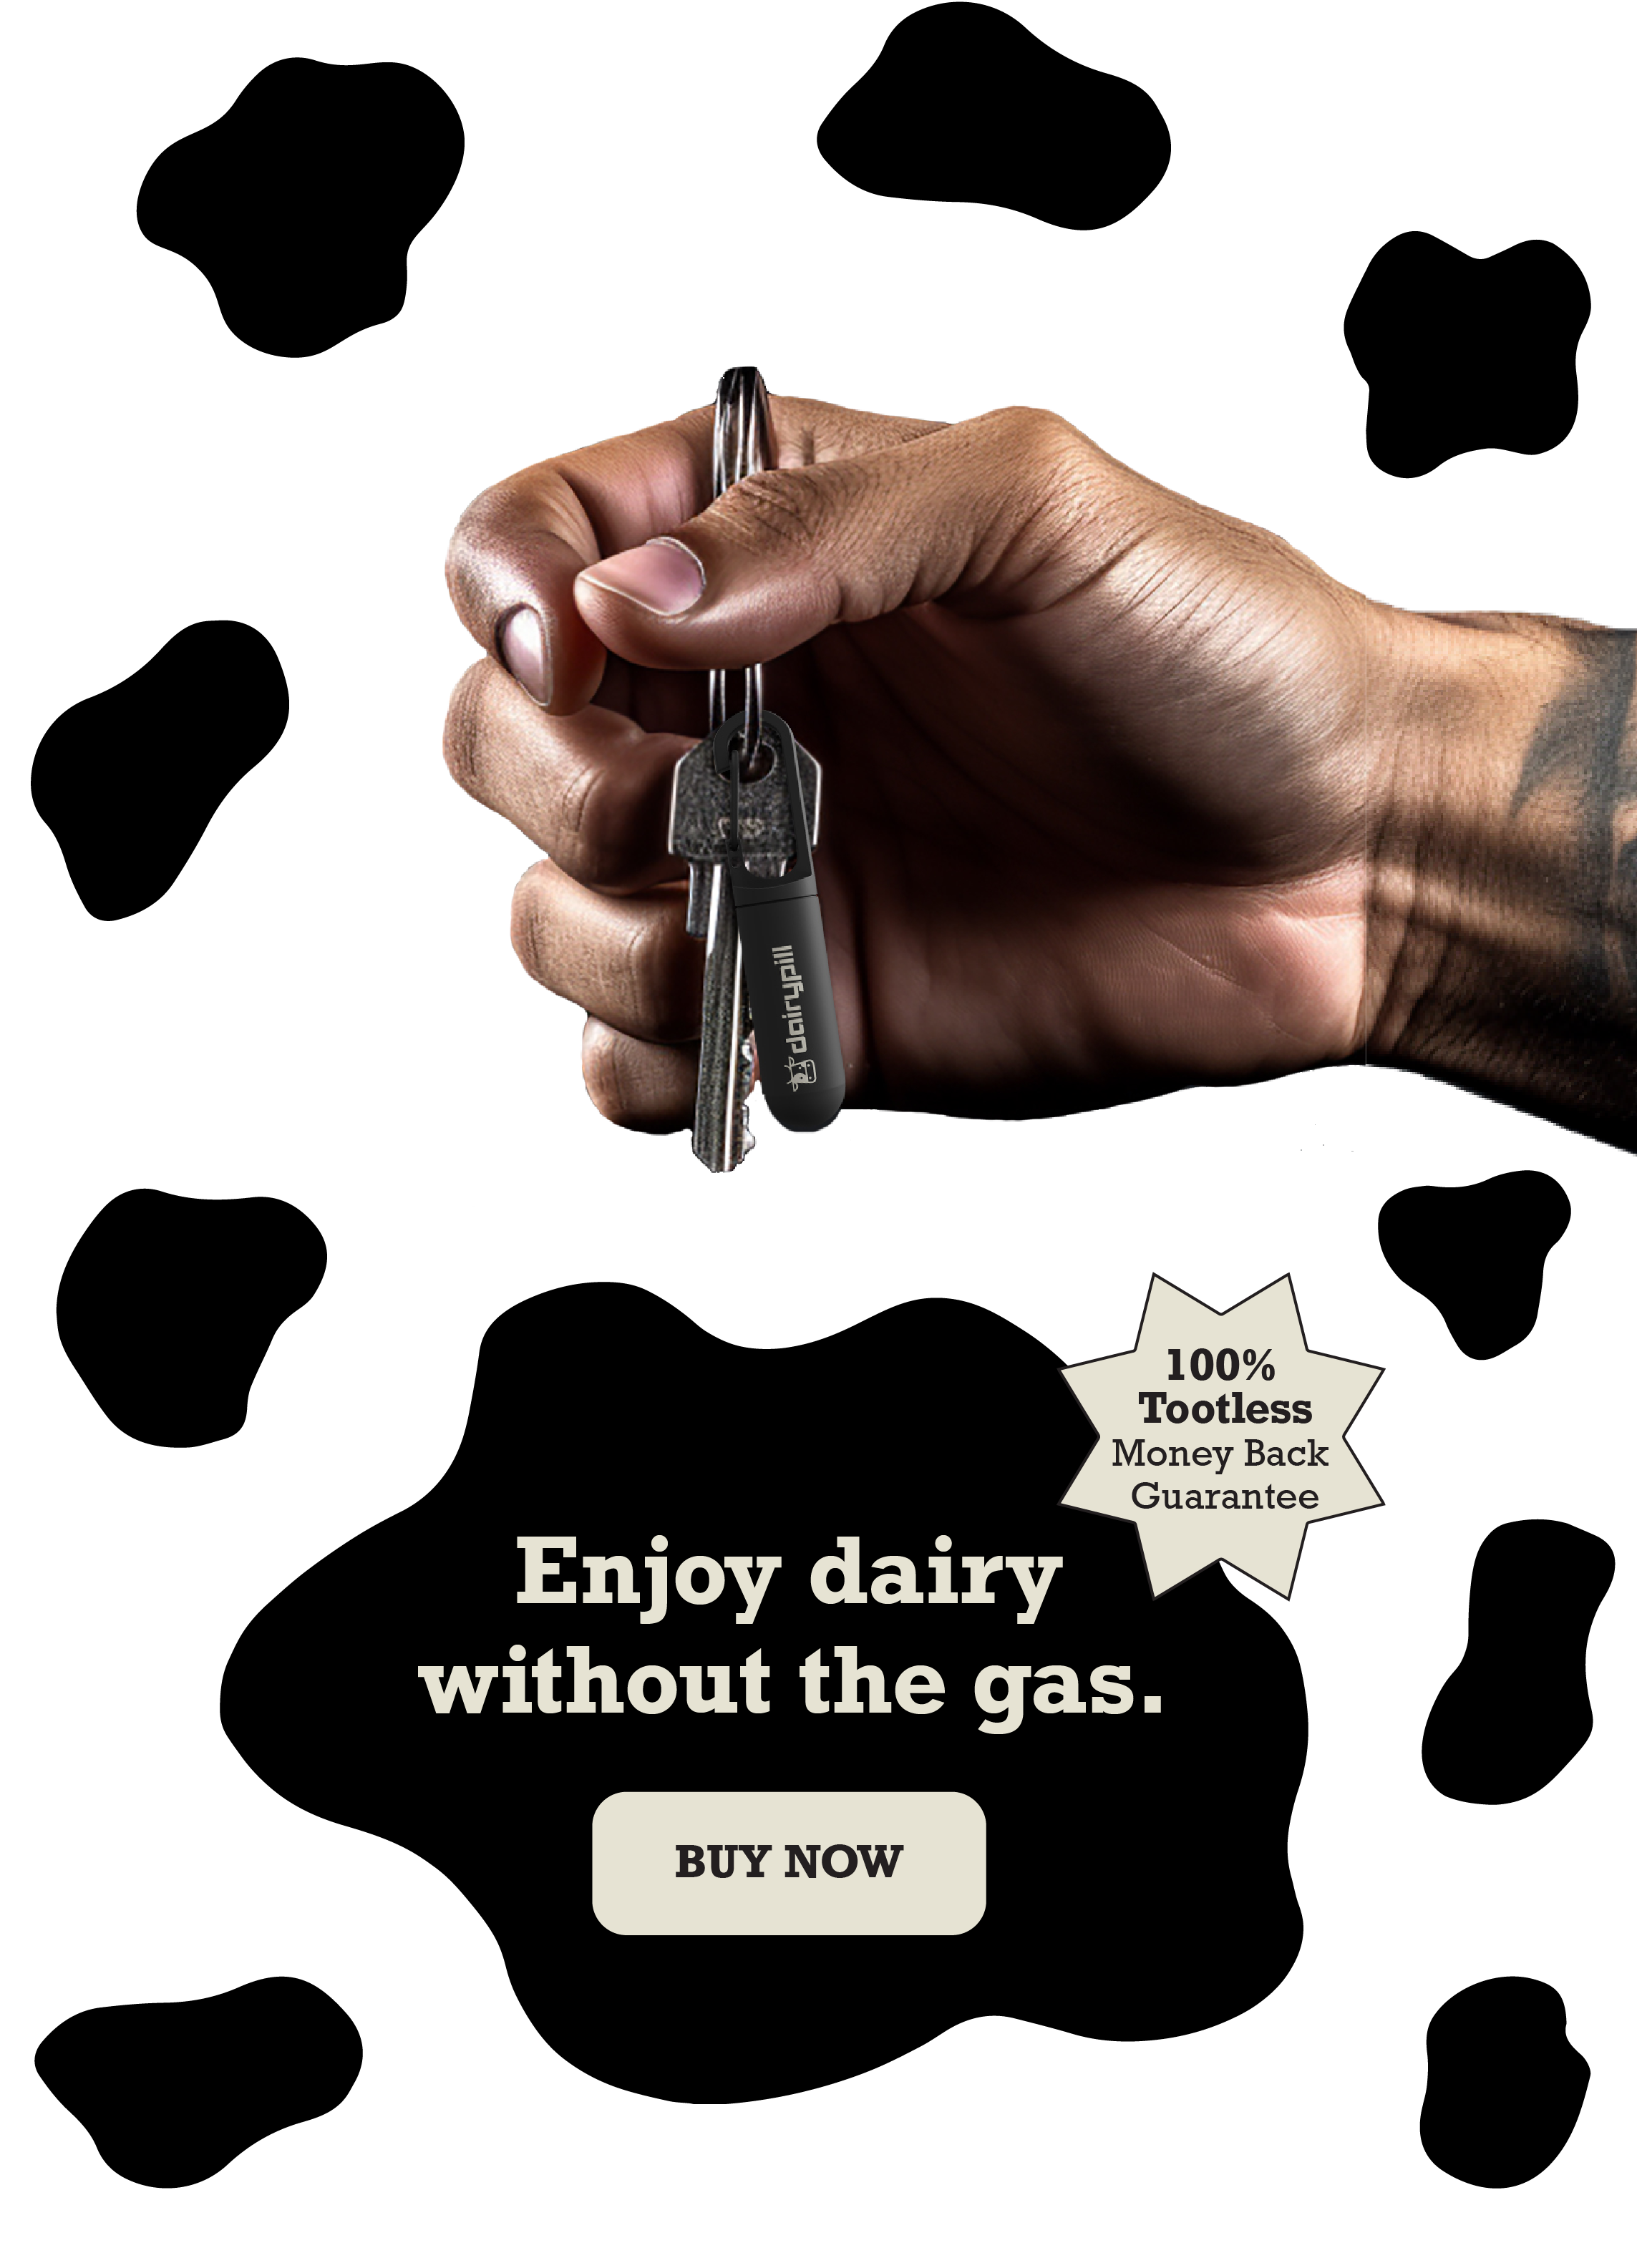 Enjoy dairy without the gas. DairyPill keychain case in hand 